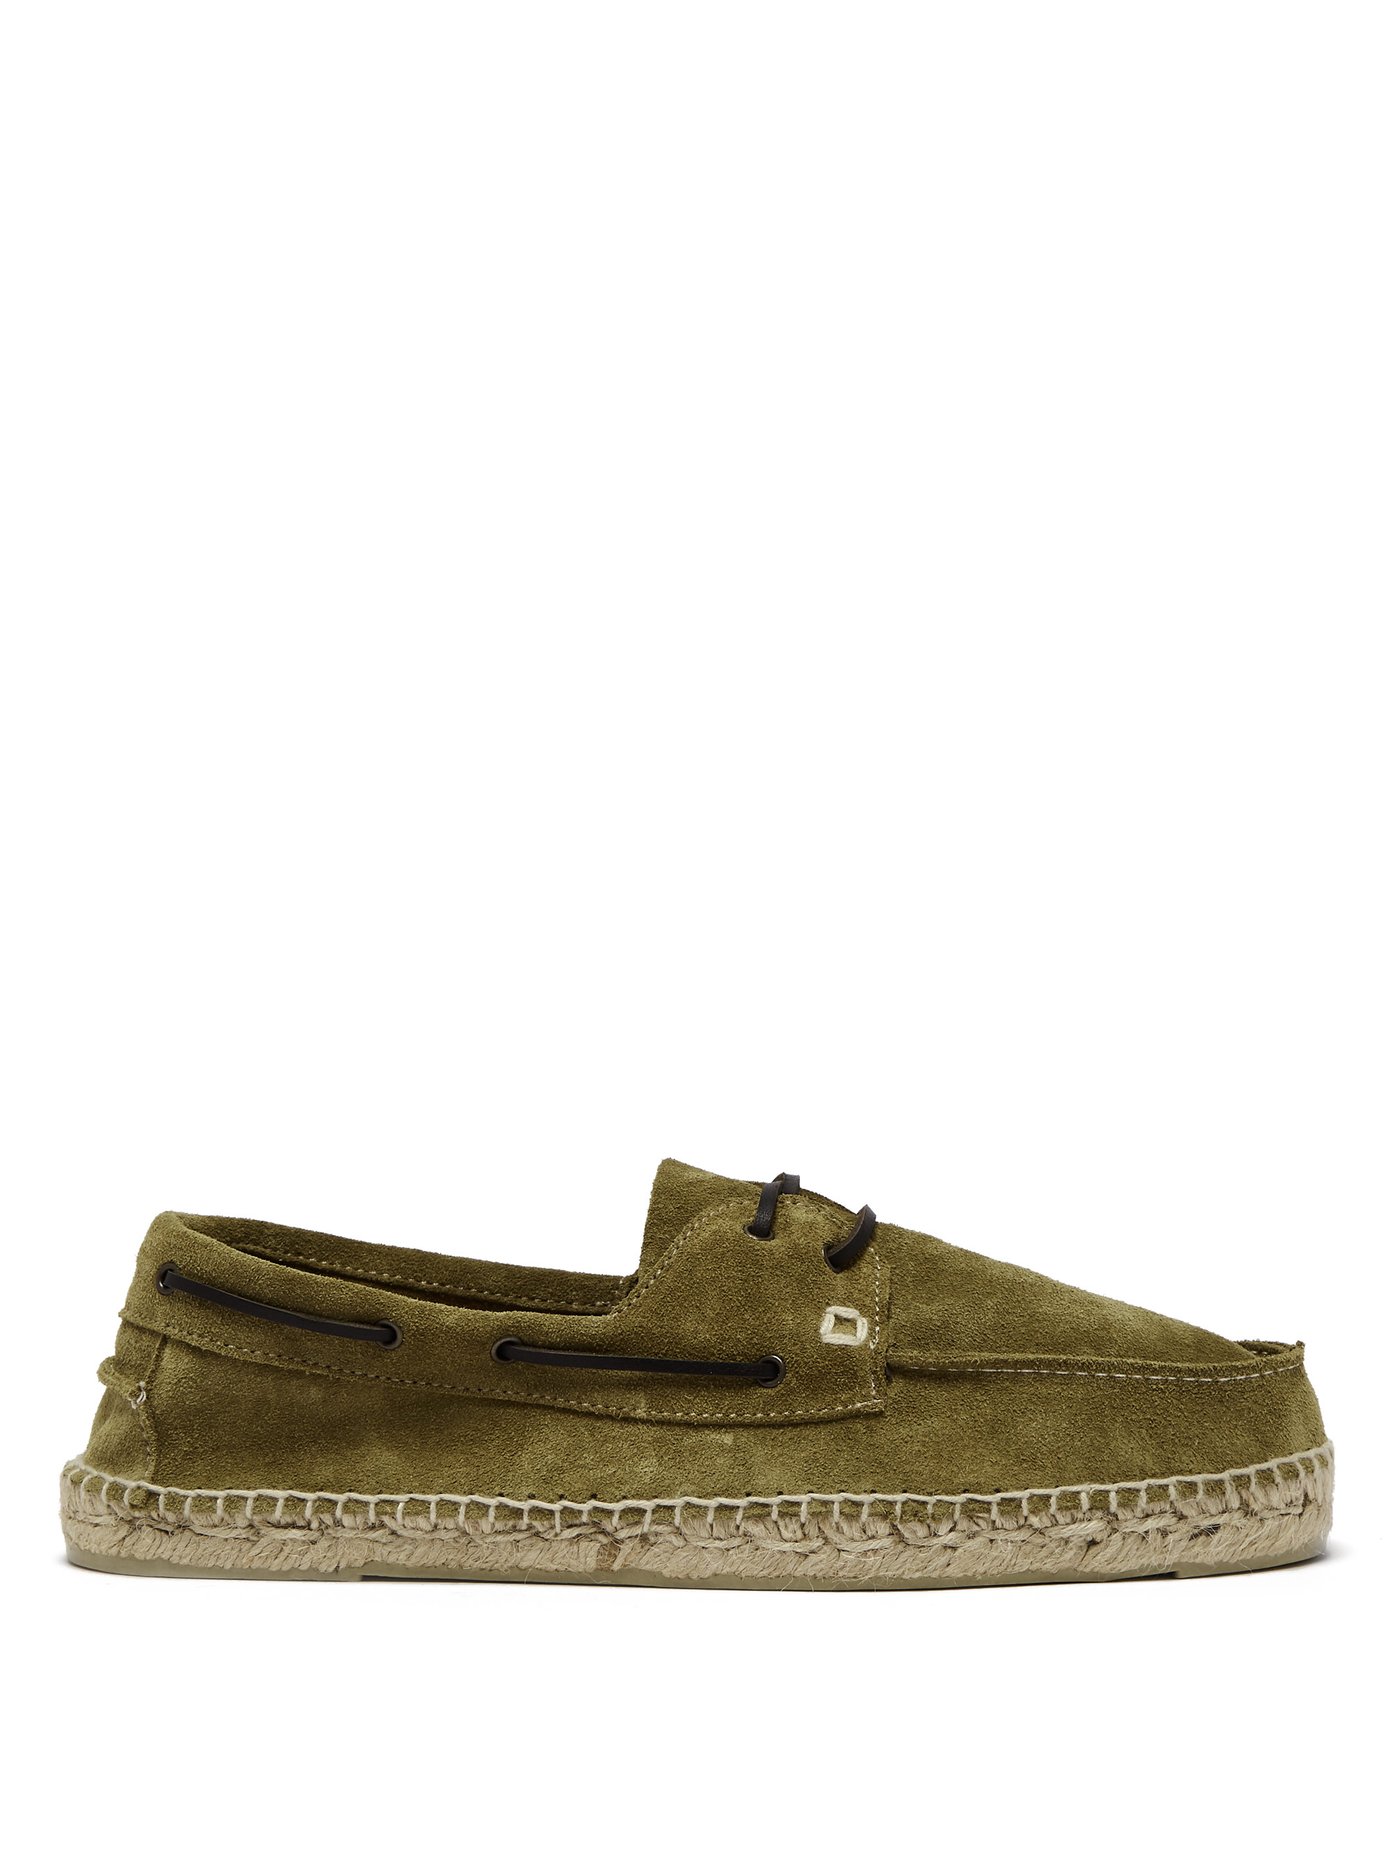 boat shoes green